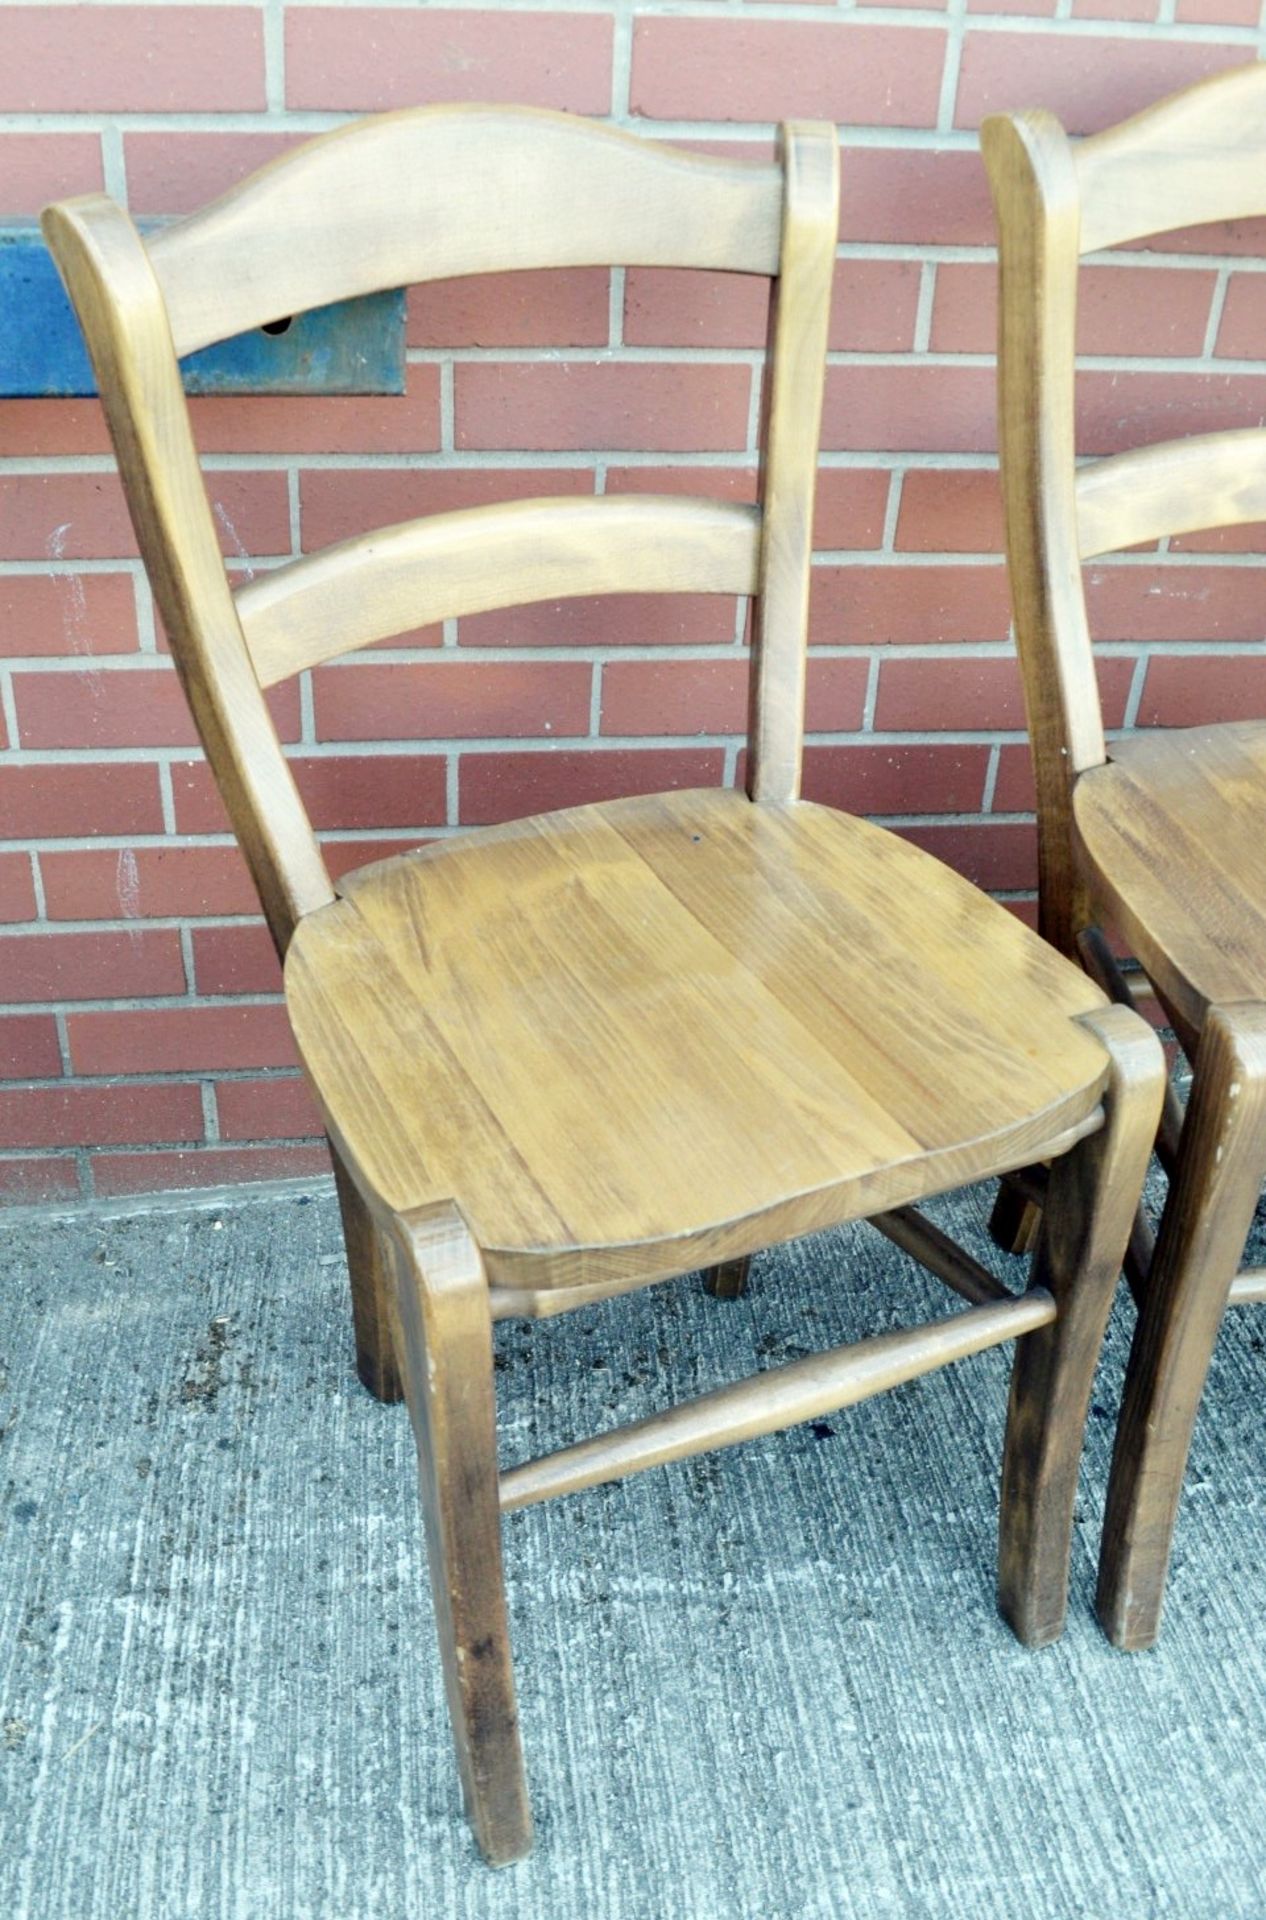 3 x Matching Sturdy Solid Wood Chairs With An Attractive Varnished Finish - Dimensions: H90 x W47 - Bild 7 aus 7